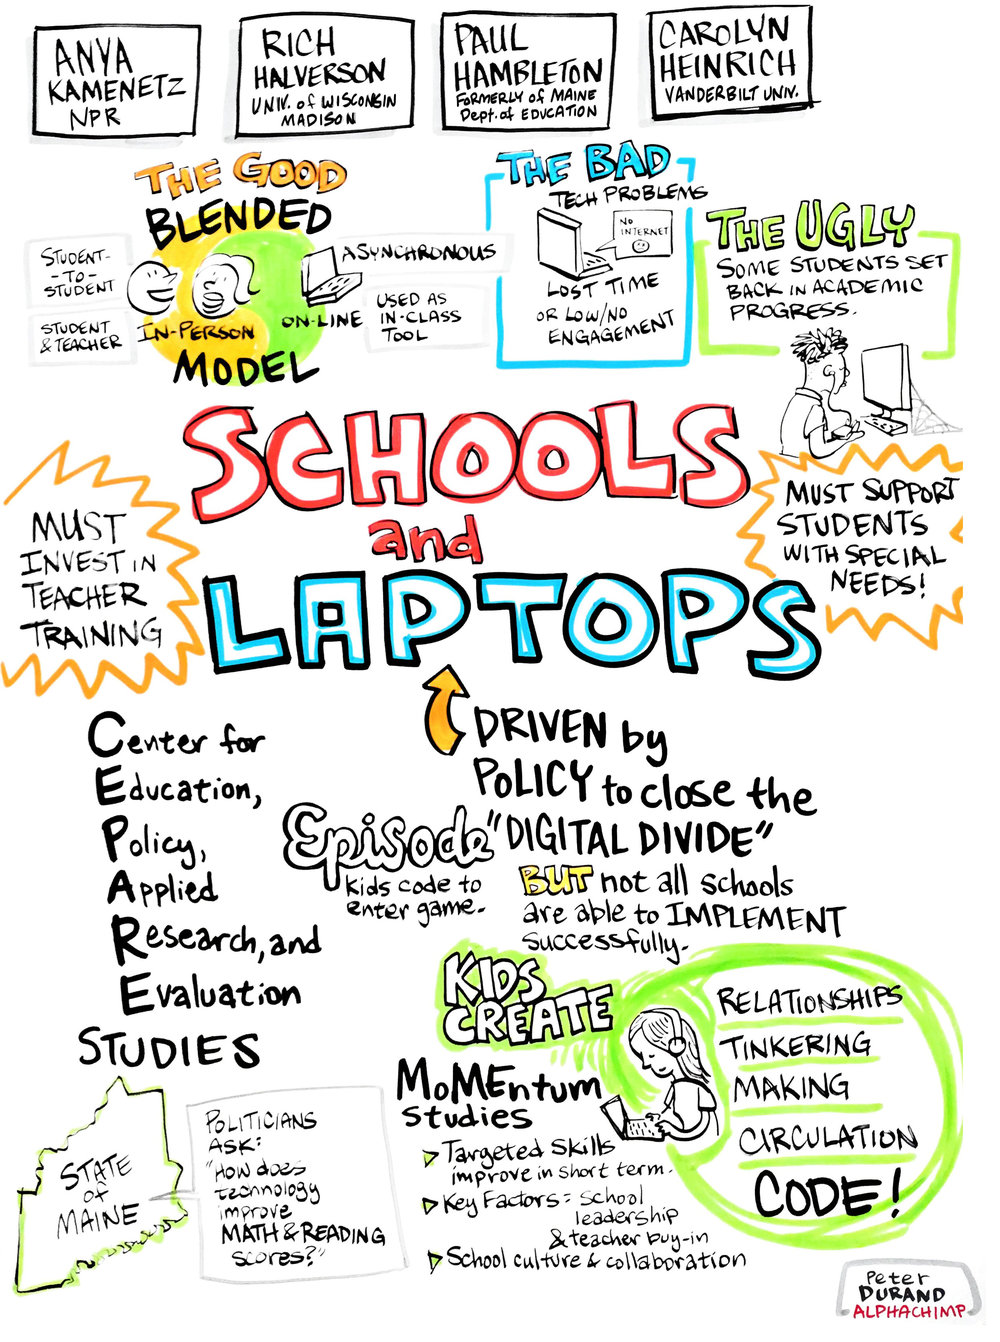 Technology and Laptops in Schools